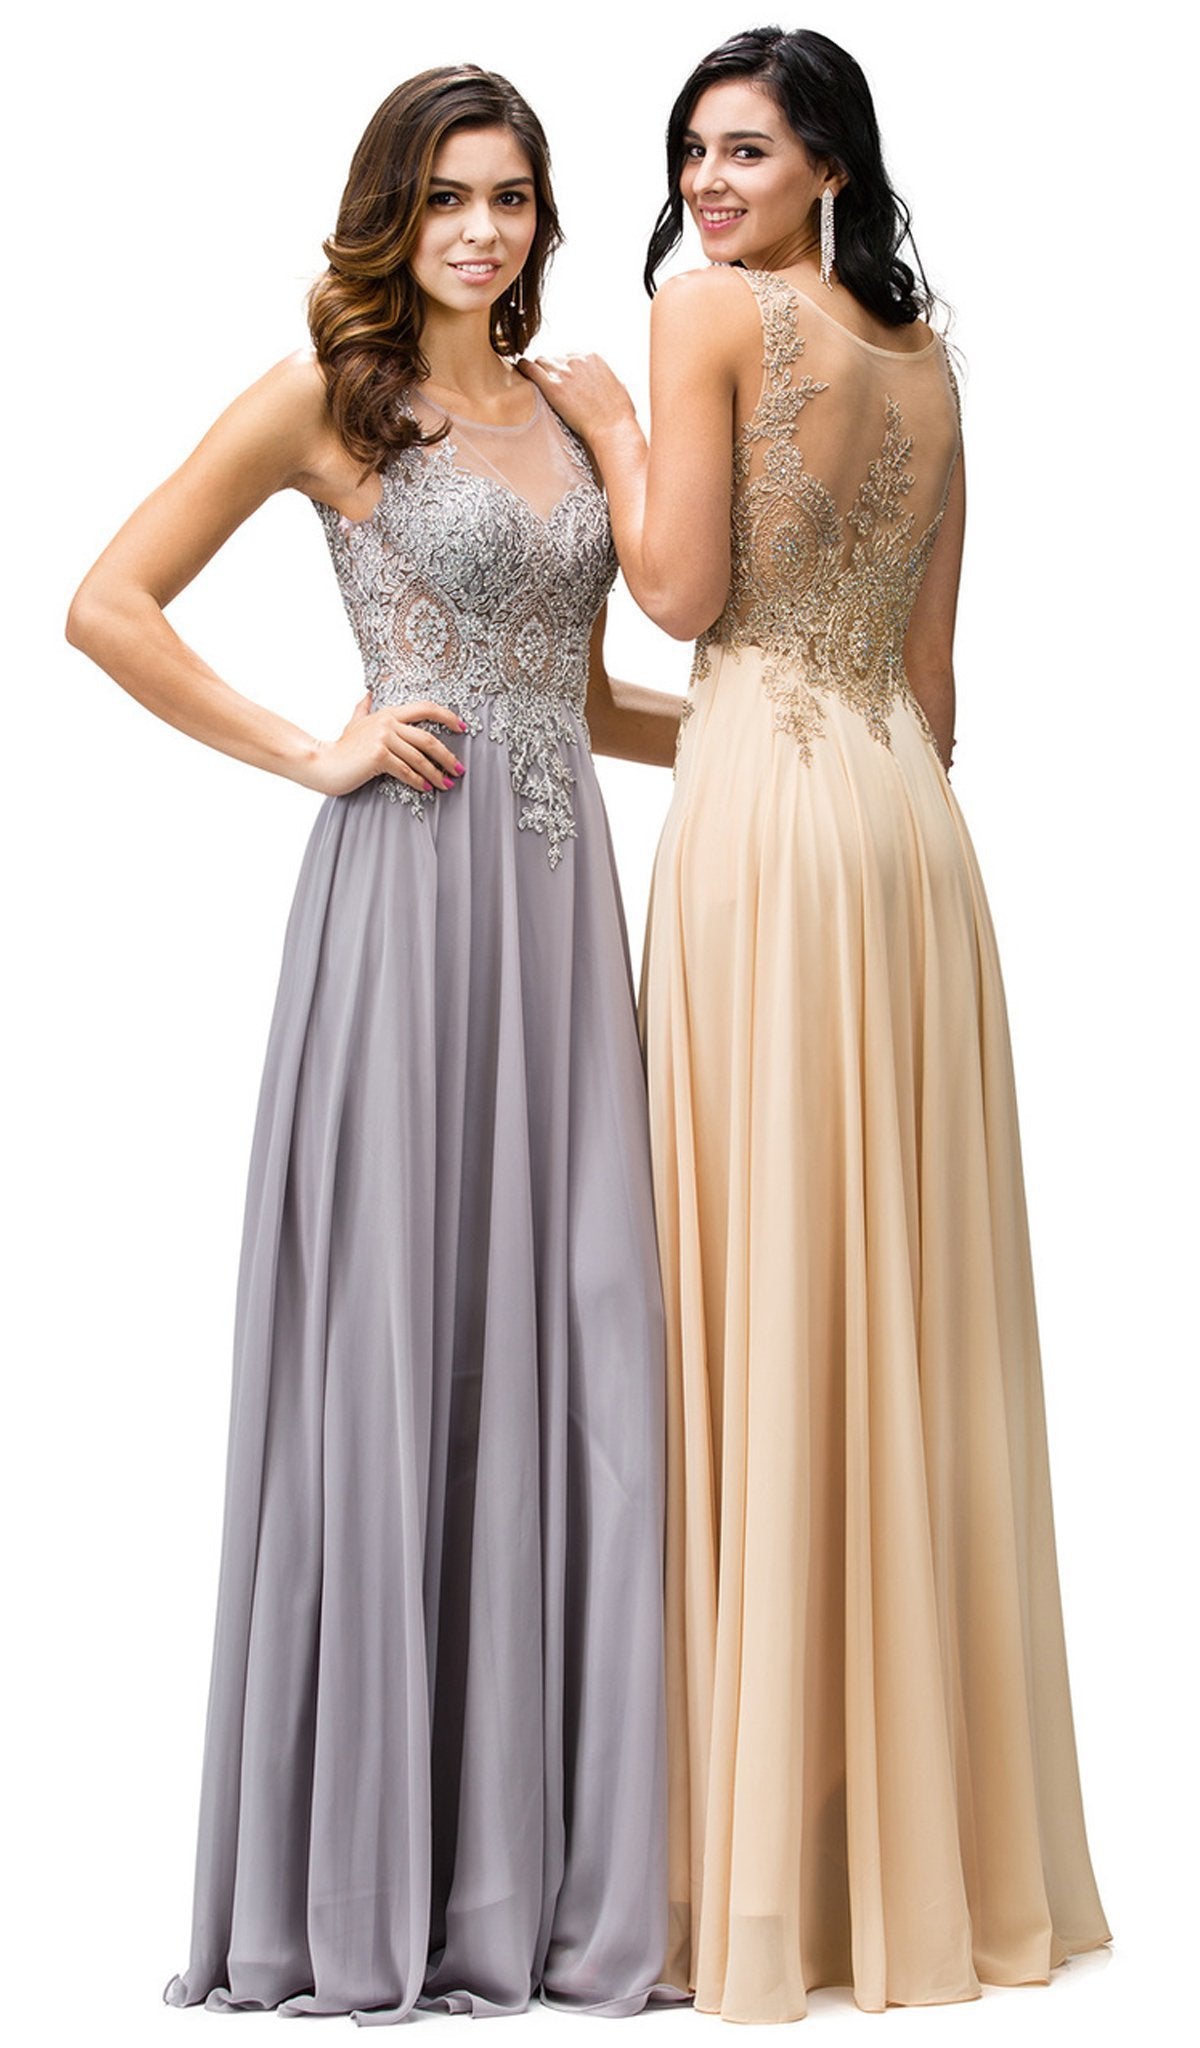 Dancing Queen - 9191 Lace Appliqued Chiffon Prom Dress Special Occasion Dress XS / Champagne